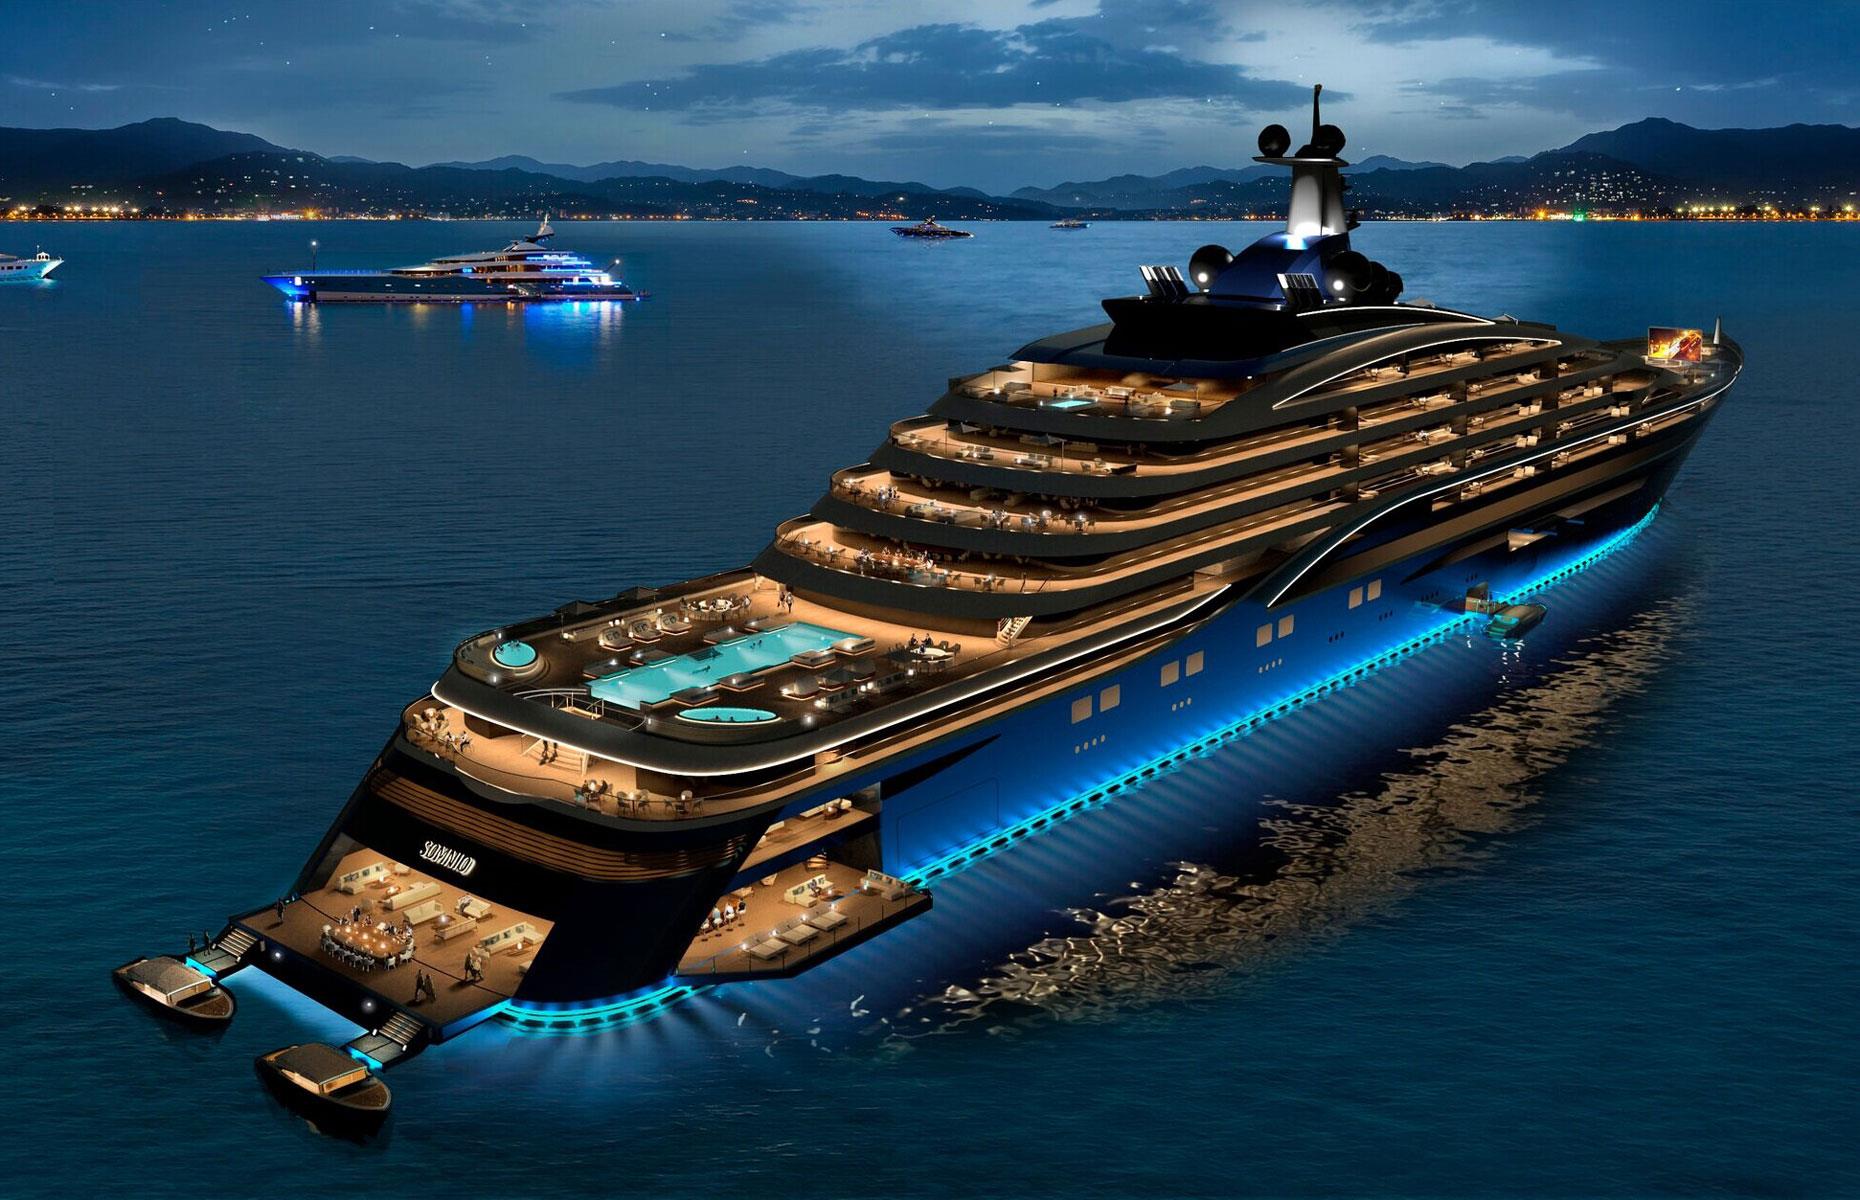 <p>Ready to discover the ultimate in nautical eye candy?</p>  <p>With the largest-ever superyacht poised to grace the high seas – and several other spectacular launches on the horizon – 2024 is tipped to be a truly unforgettable year for fans of floating palaces.</p>  <p><strong>Jump aboard to discover the most hotly anticipated superyachts scheduled for delivery this year, from state-of-the-art explorers to a record-breaking model that's expected to cost a staggering $600 million (£470m). </strong>All dollar amounts in US dollars.</p>